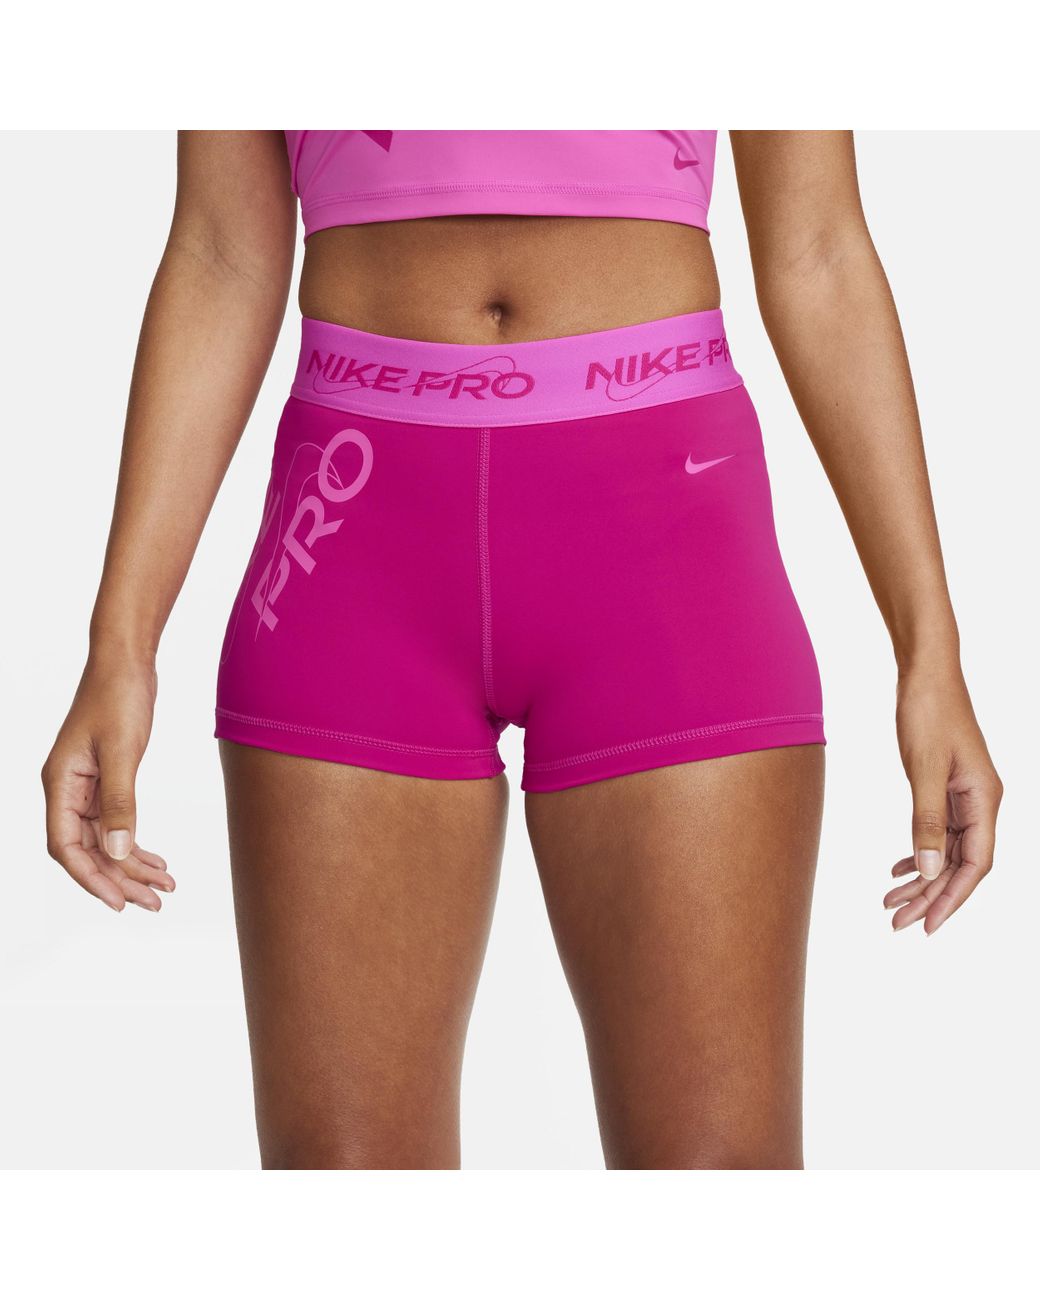 Nike Pro Mid-rise 3 Graphic Shorts in Pink